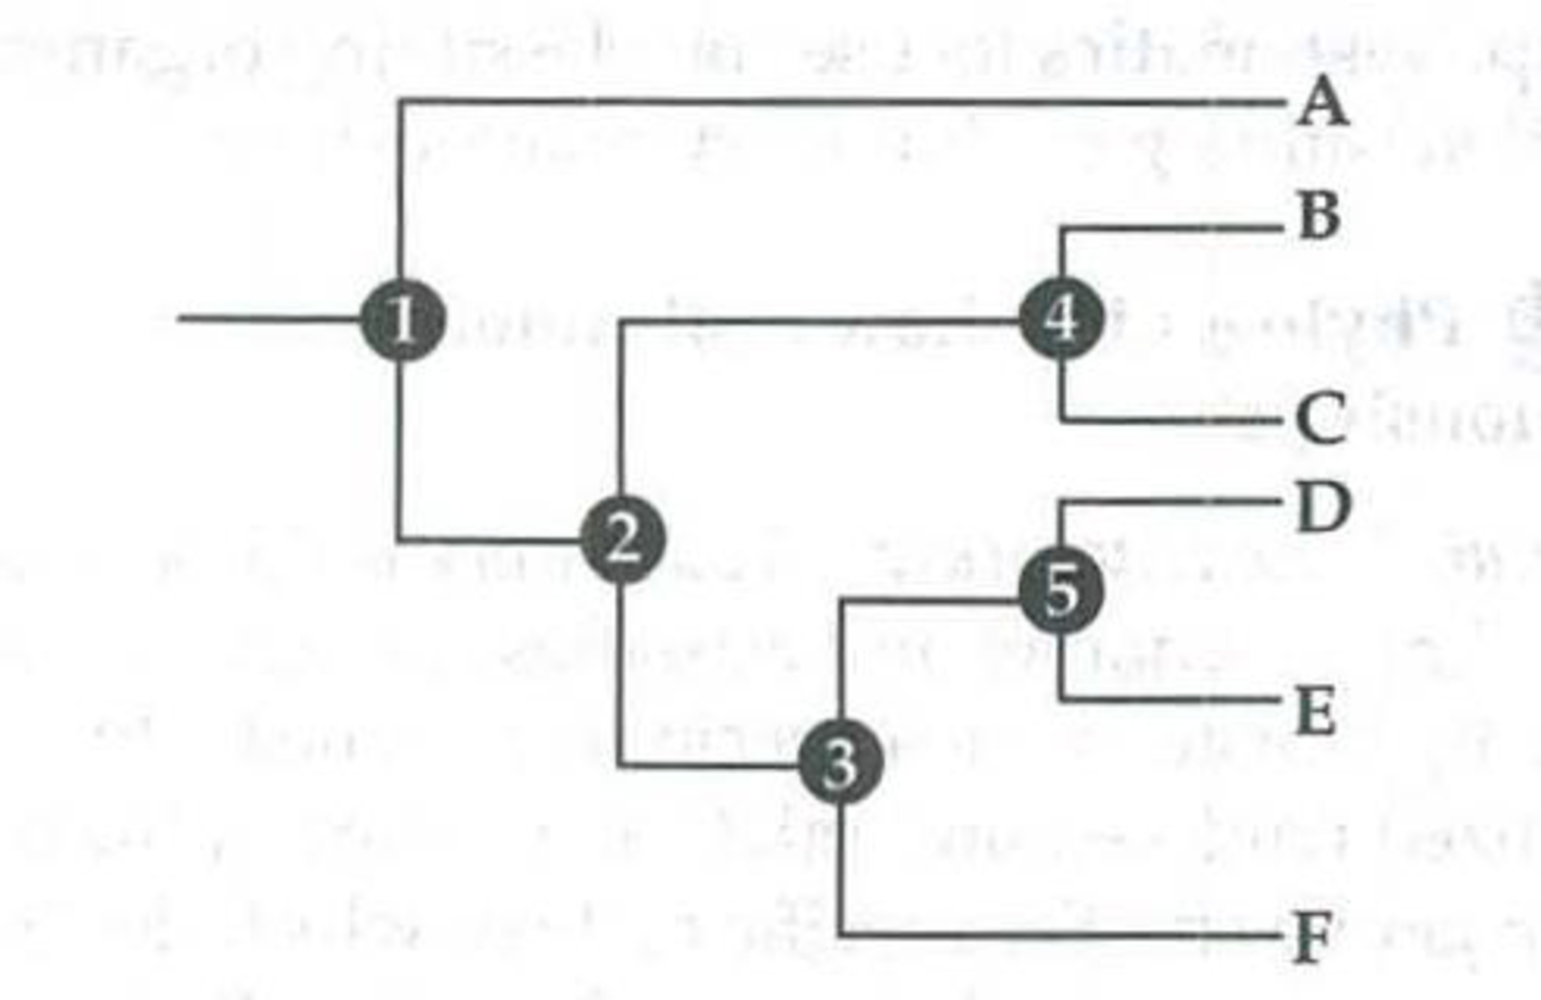 Chapter 26, Problem 1IQ, a. In this hypothetical phylogenetic tree, which number represents the common ancestor of all the 